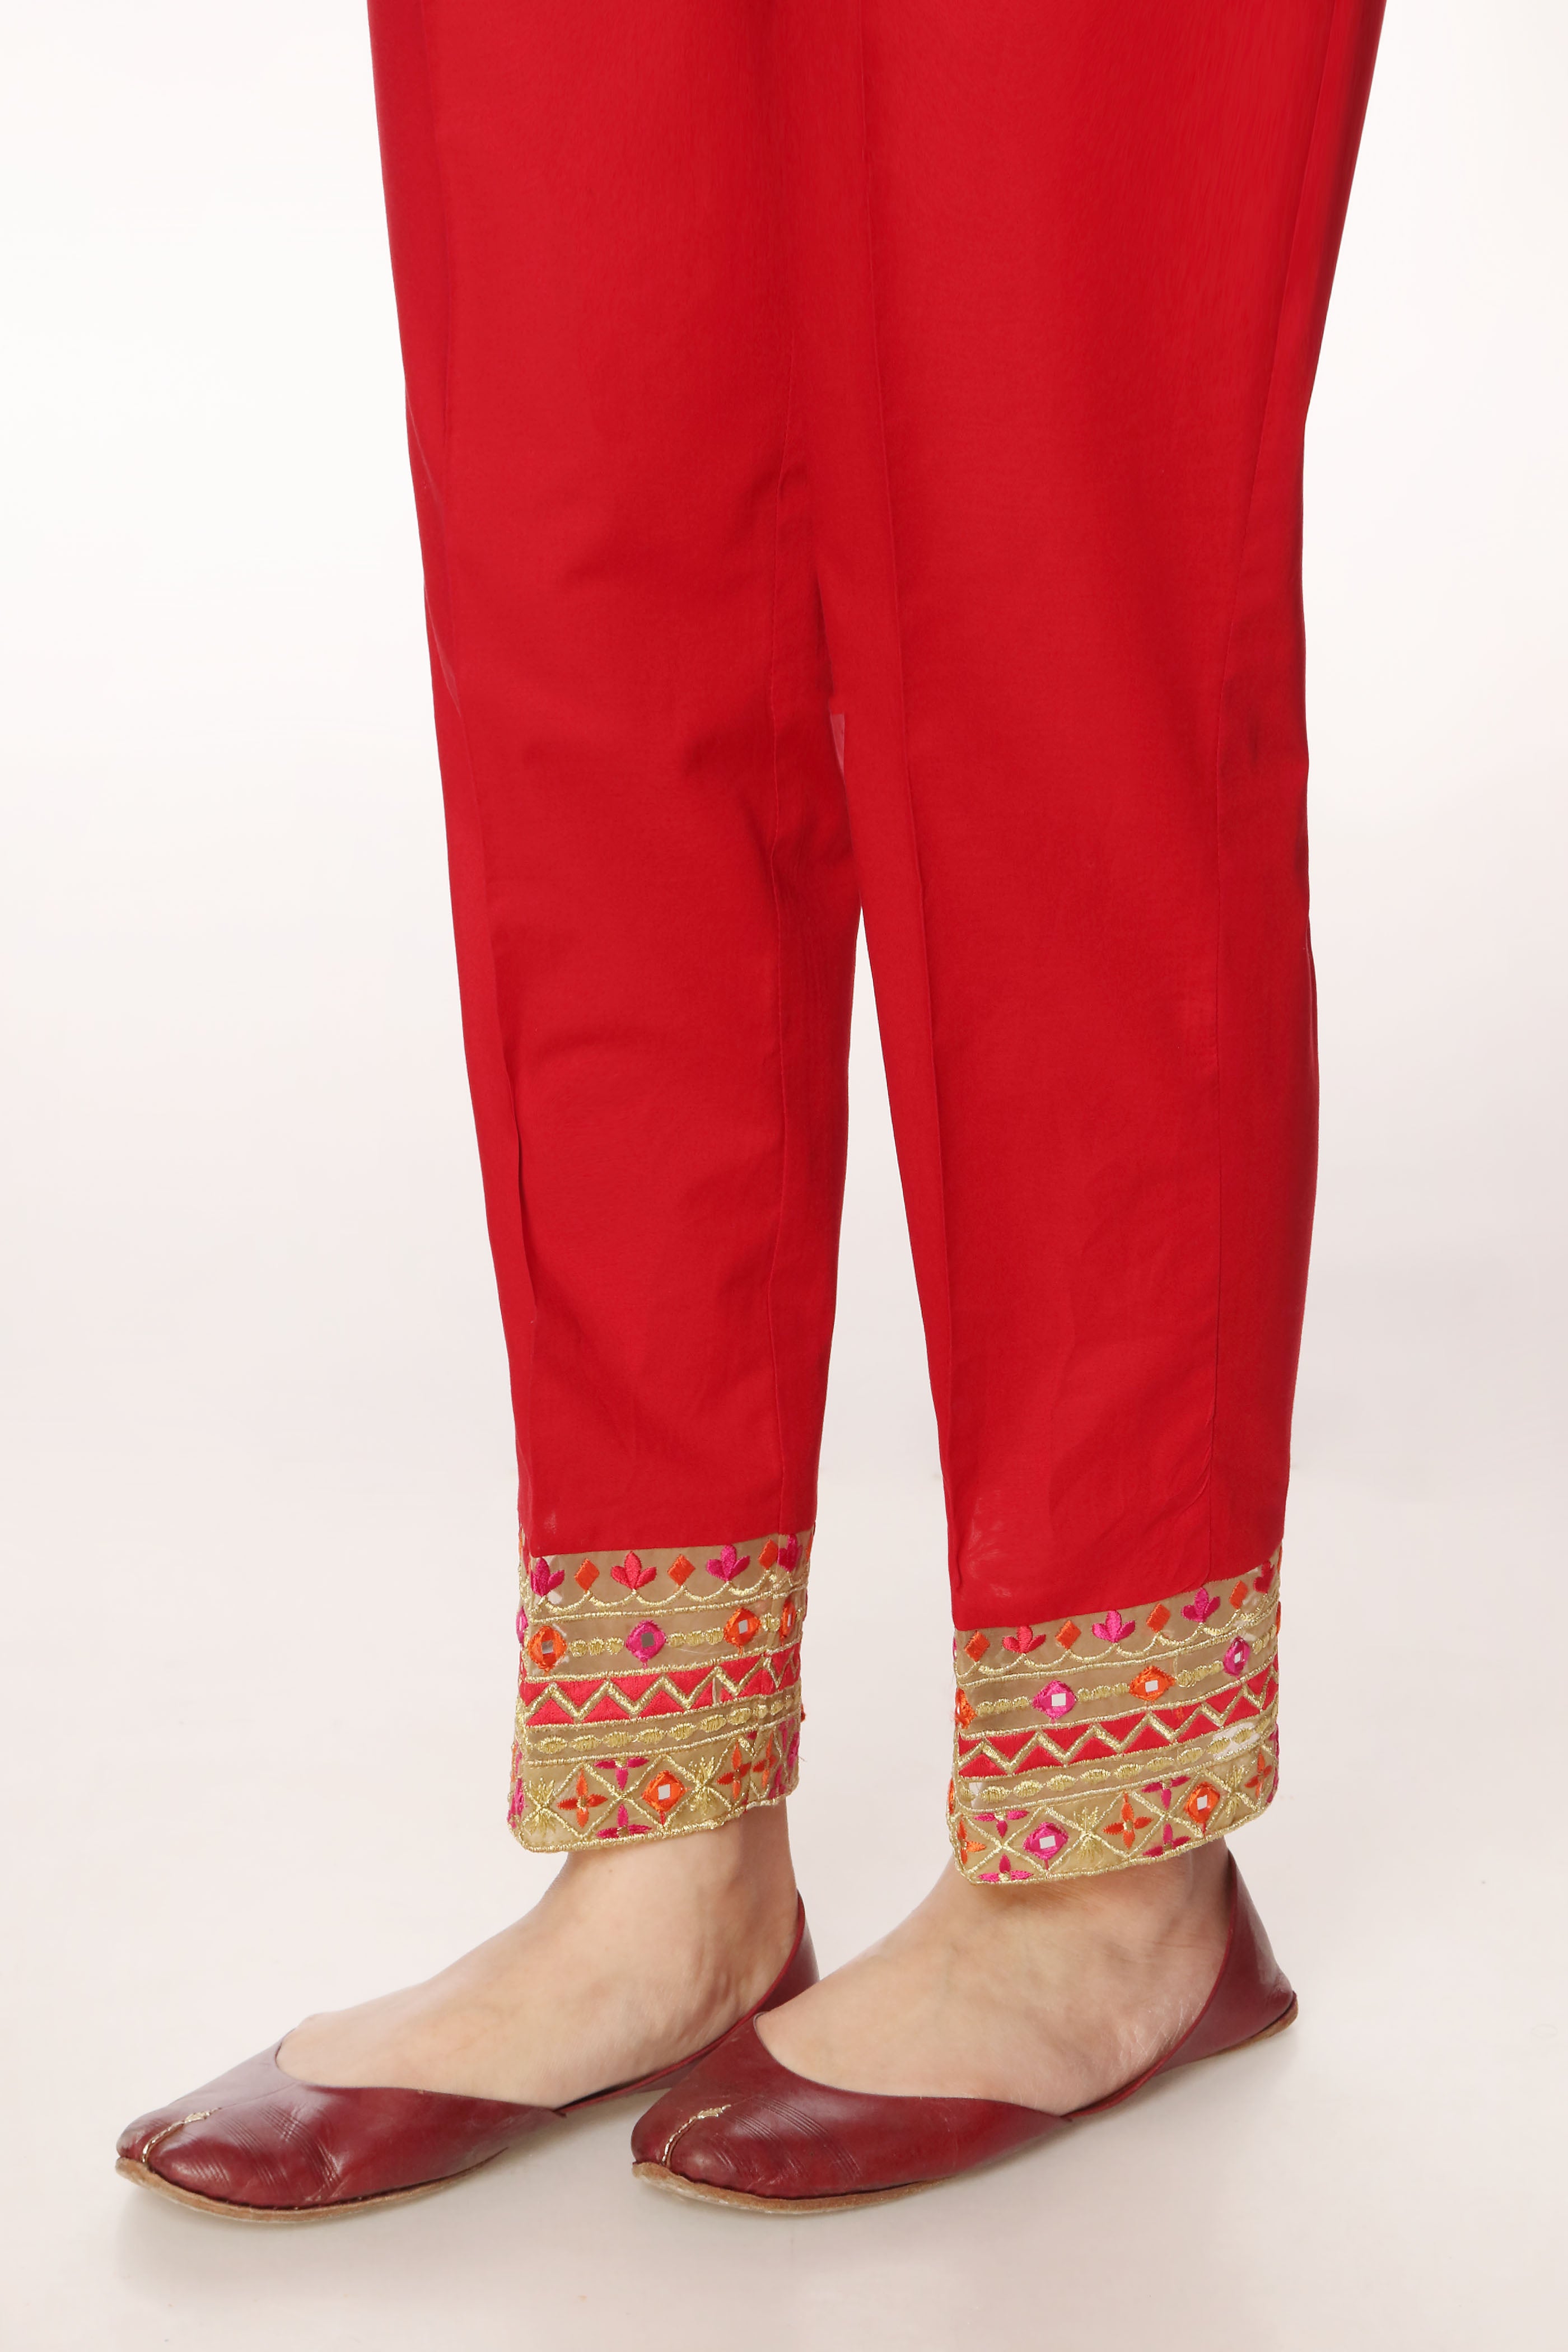 Organza Bail in Red coloured Printed Lawn fabric 2